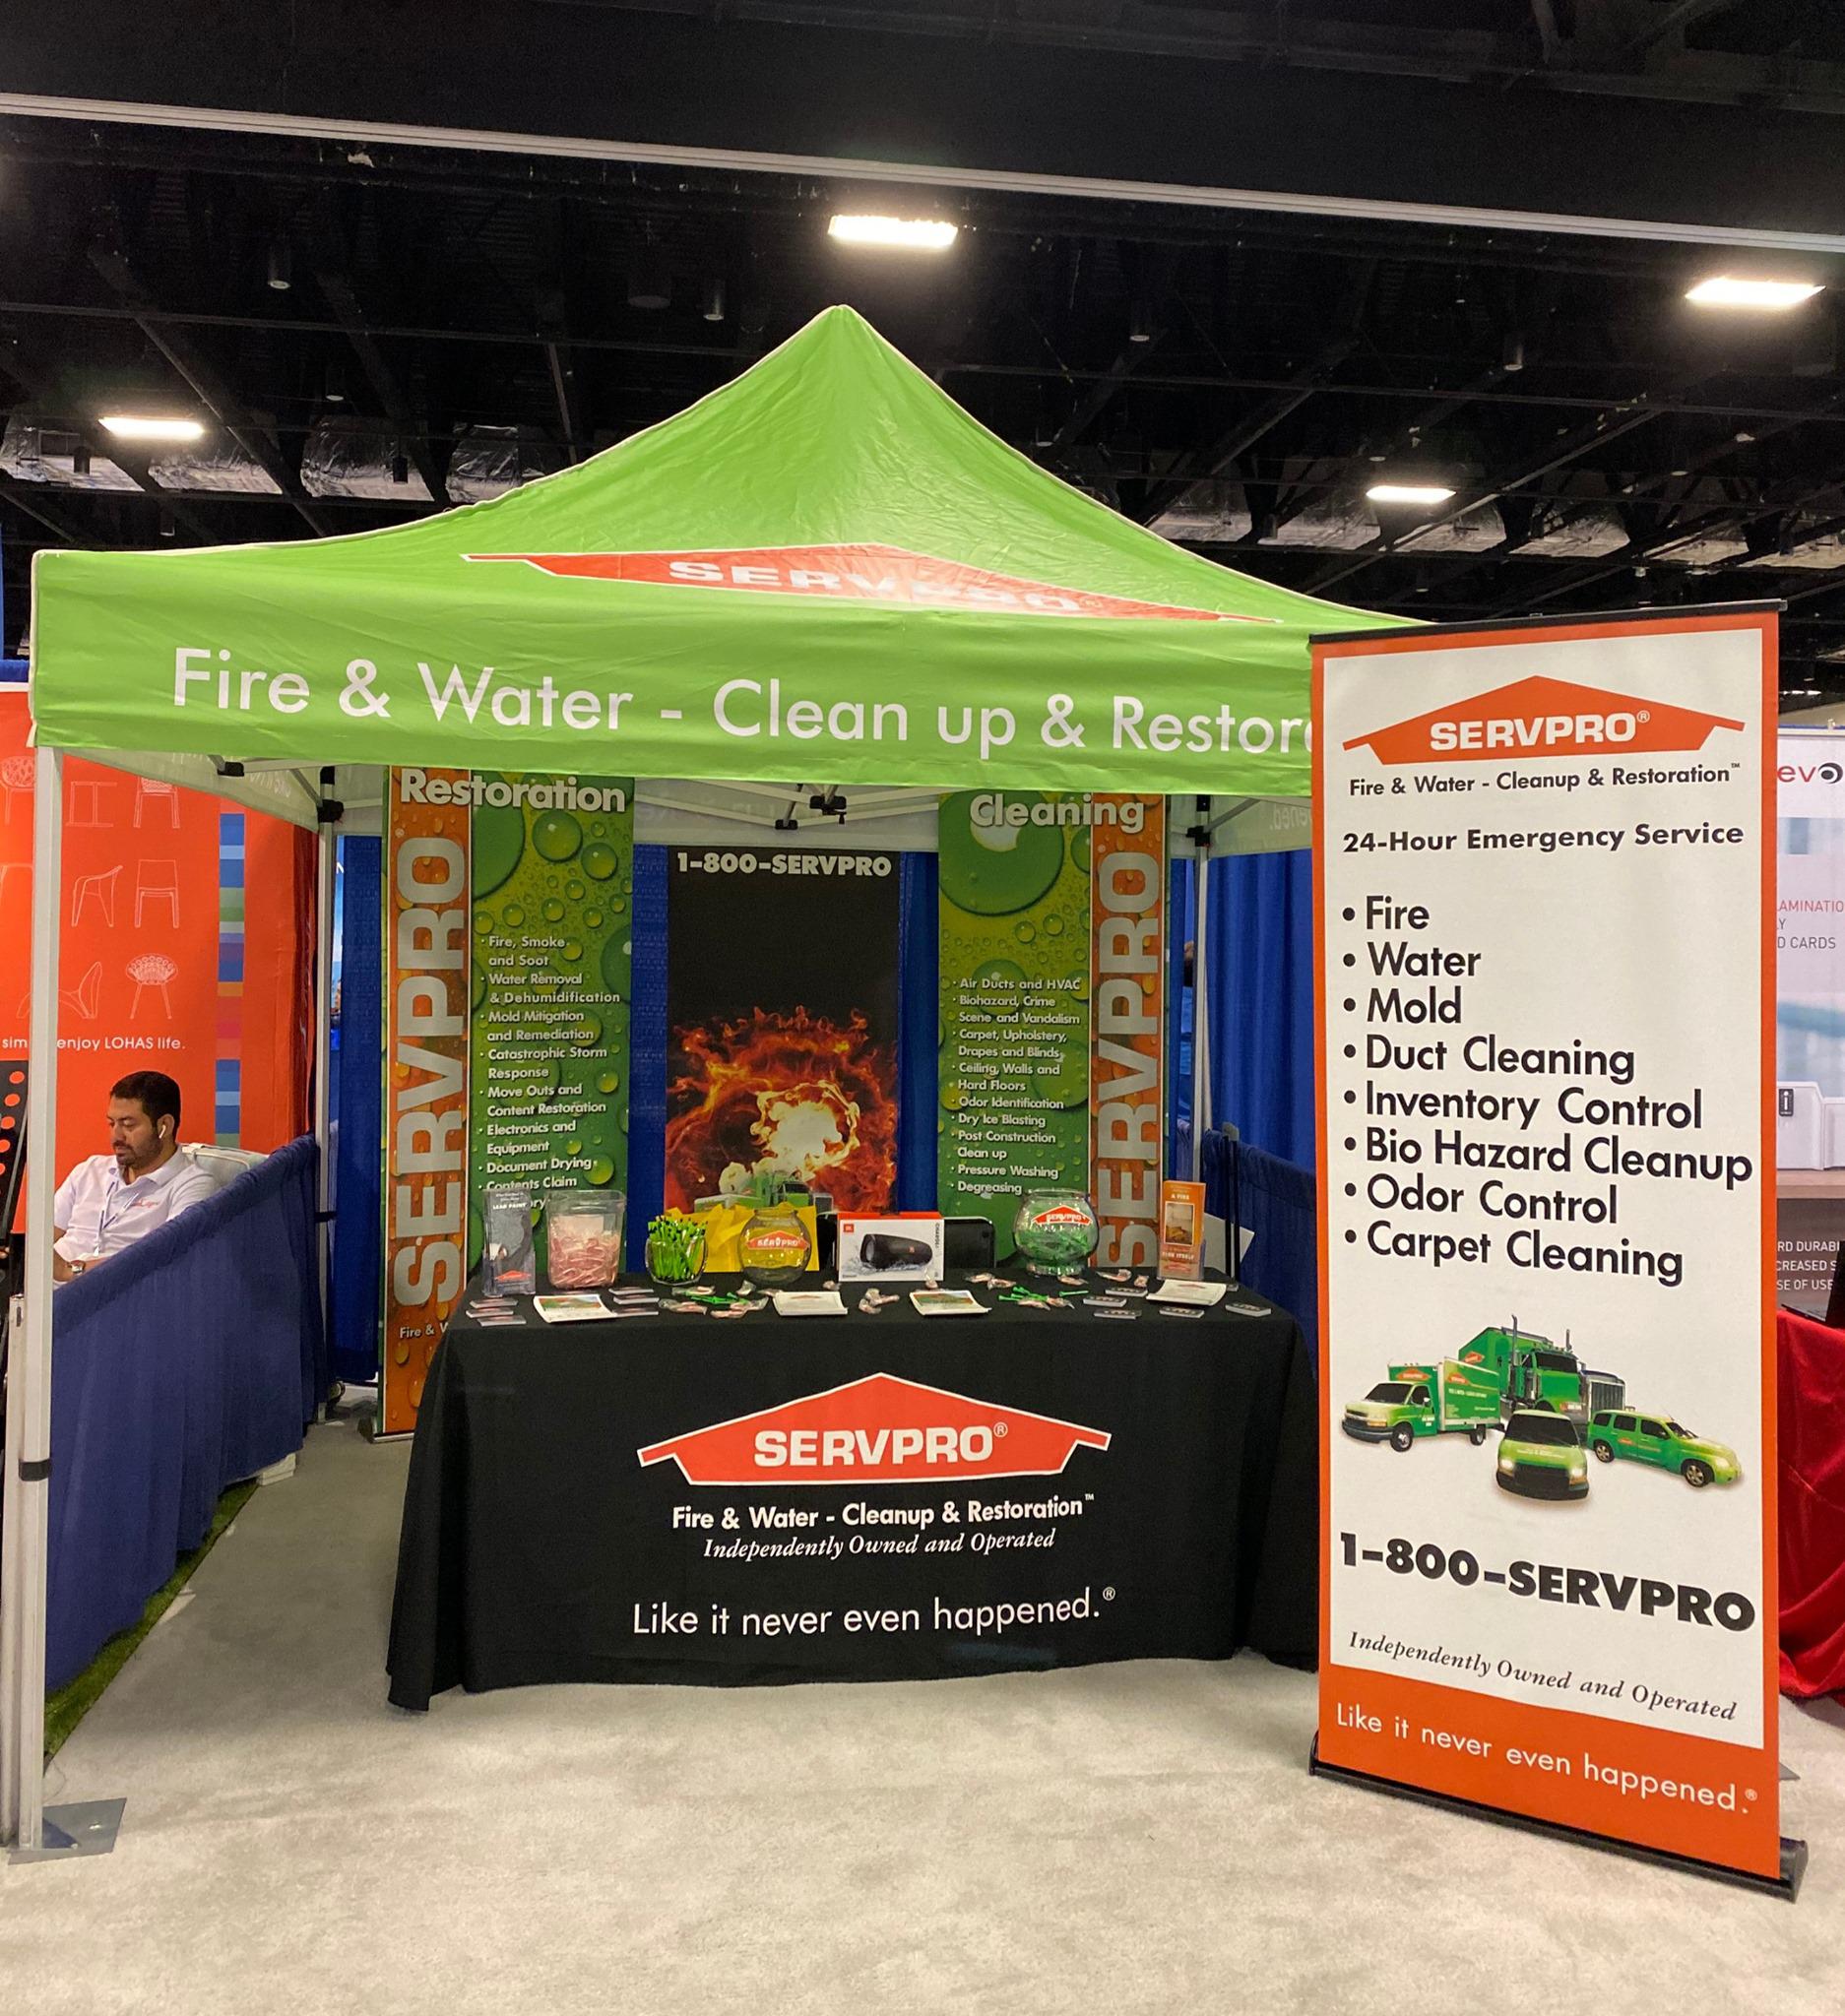 -Cooperator Expo-
Thanks for having us at the Ft Lauderdale Convention Center!